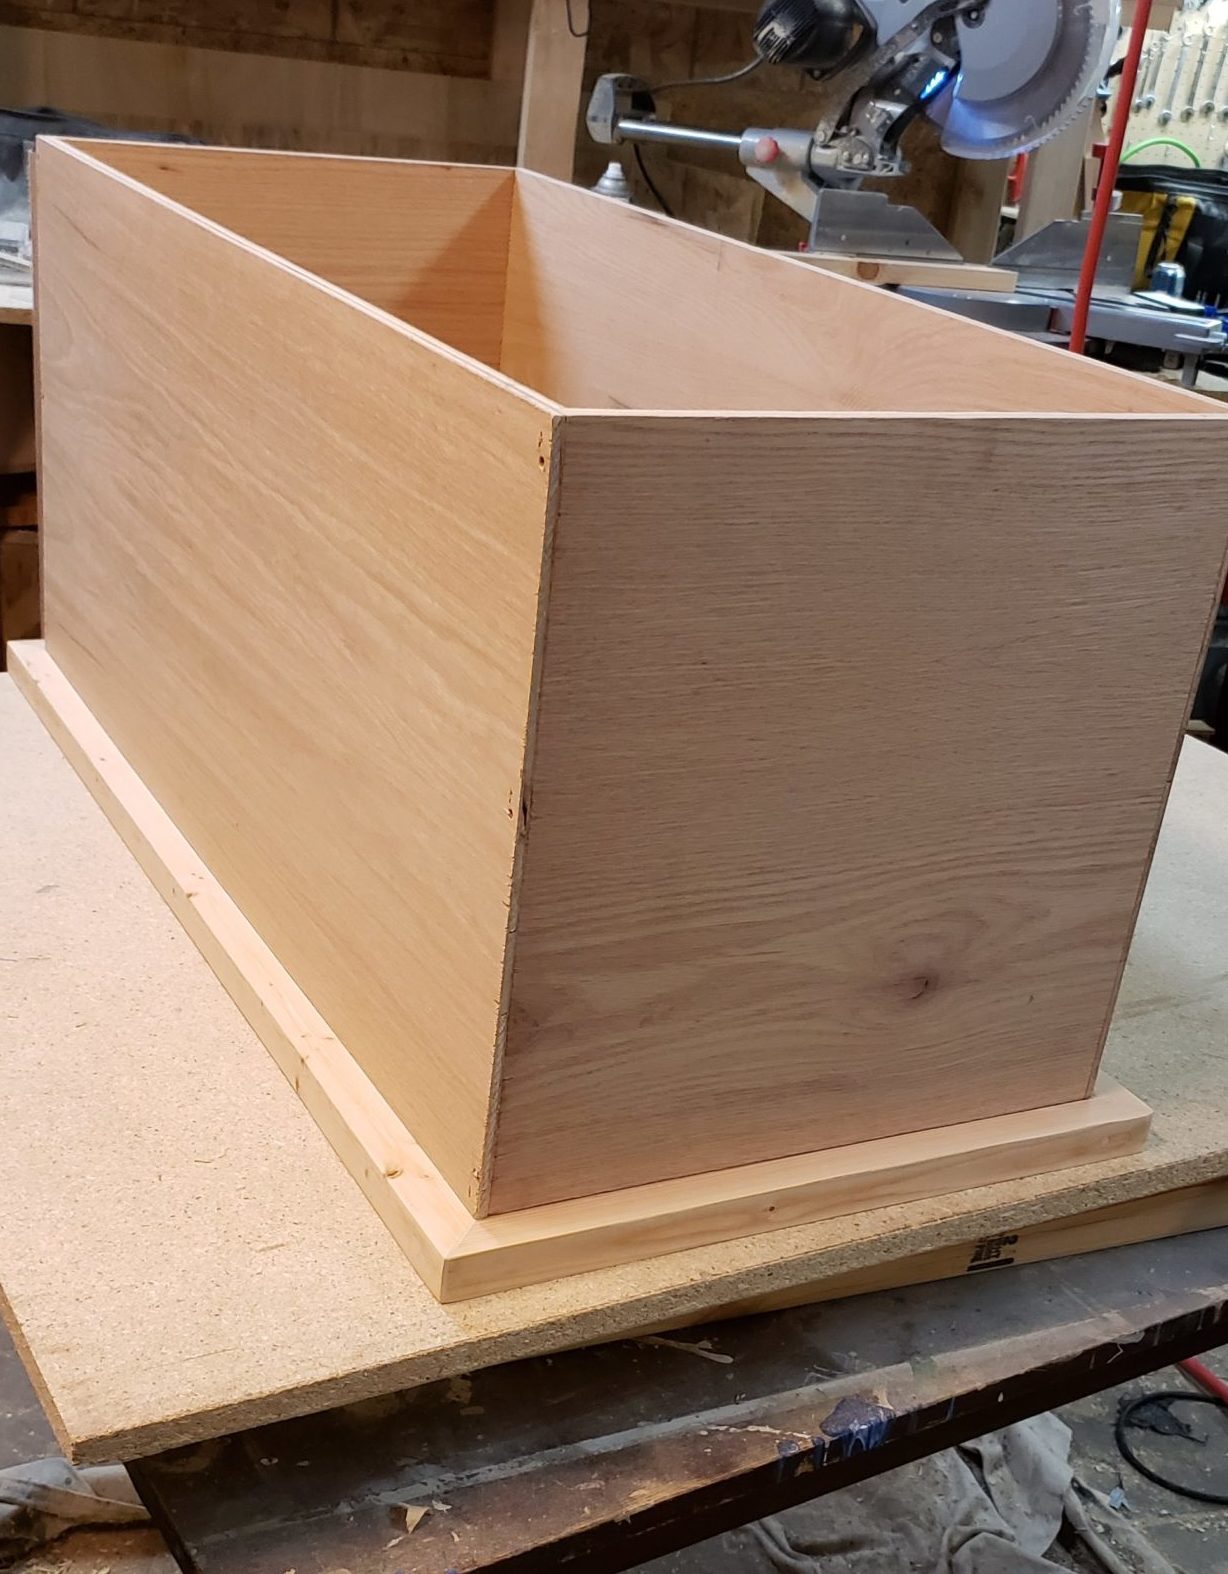 Building the Box